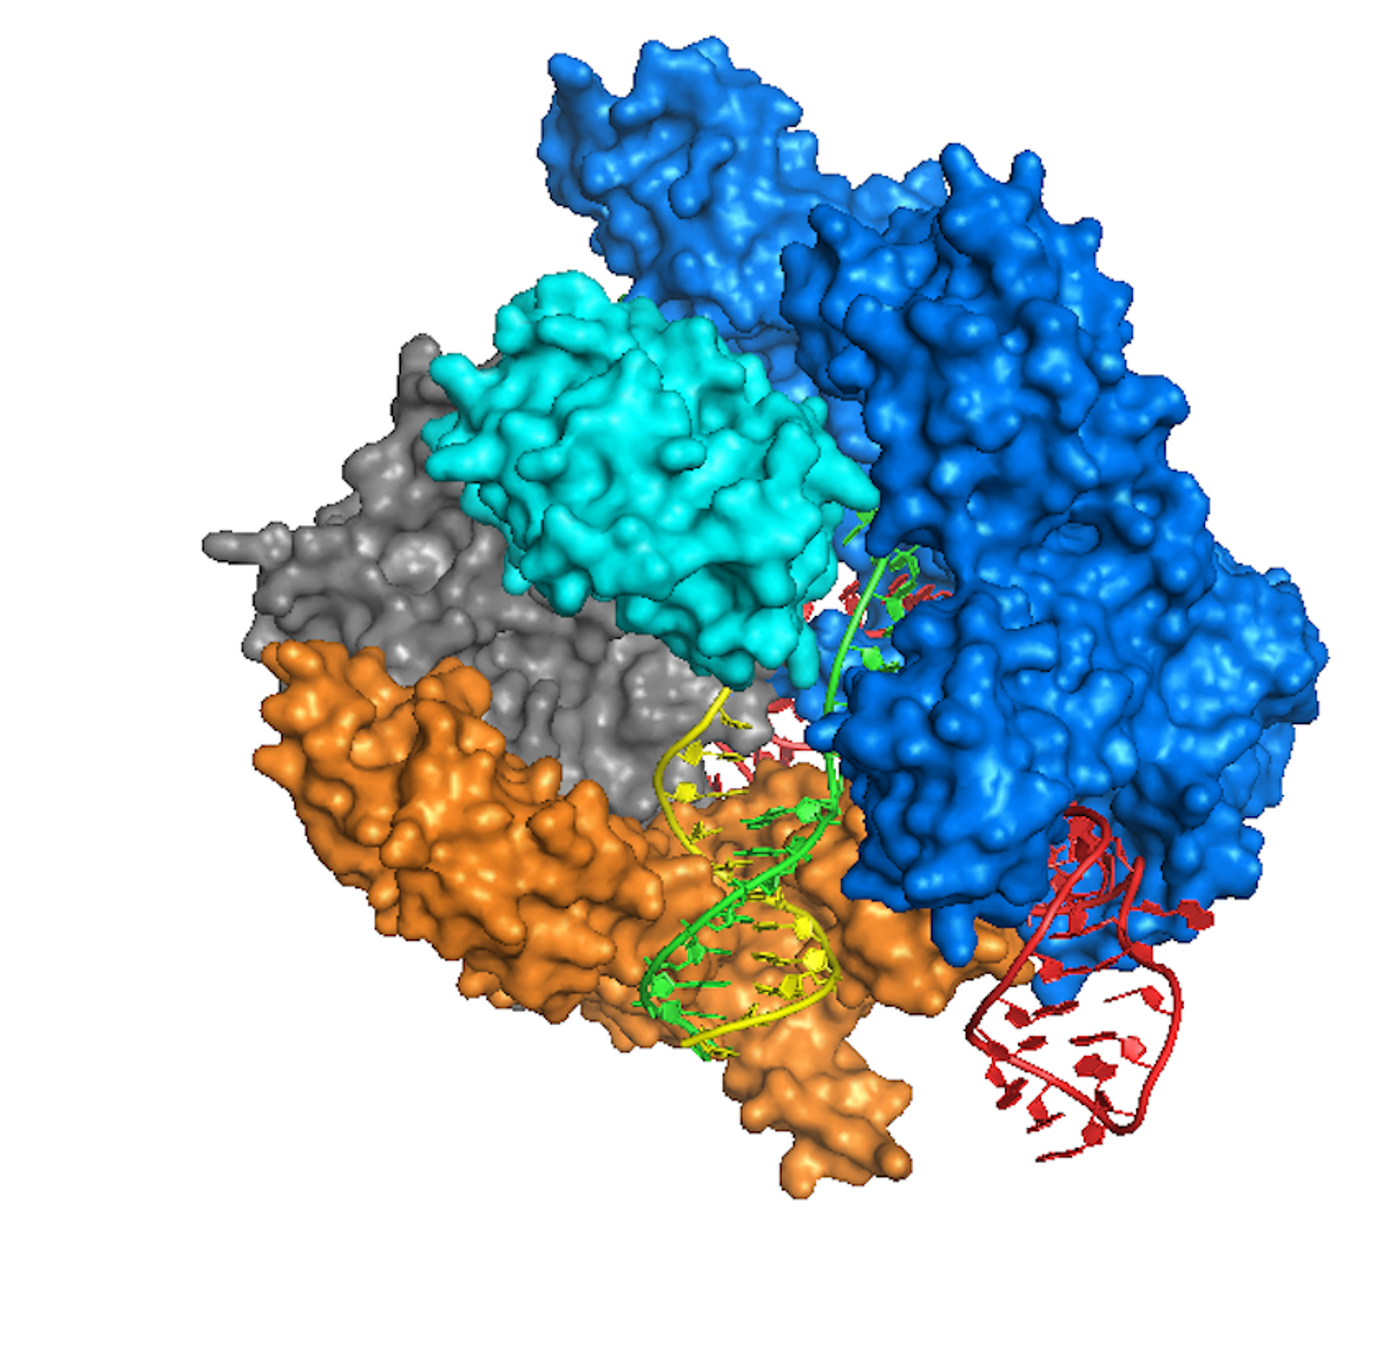 Crystal Structure of Cas9 bound to DNA based on the Anders et al 2014 Nature paper. Rendition was performed using UCSF's chimera software / Credit: Wikimedia Commons